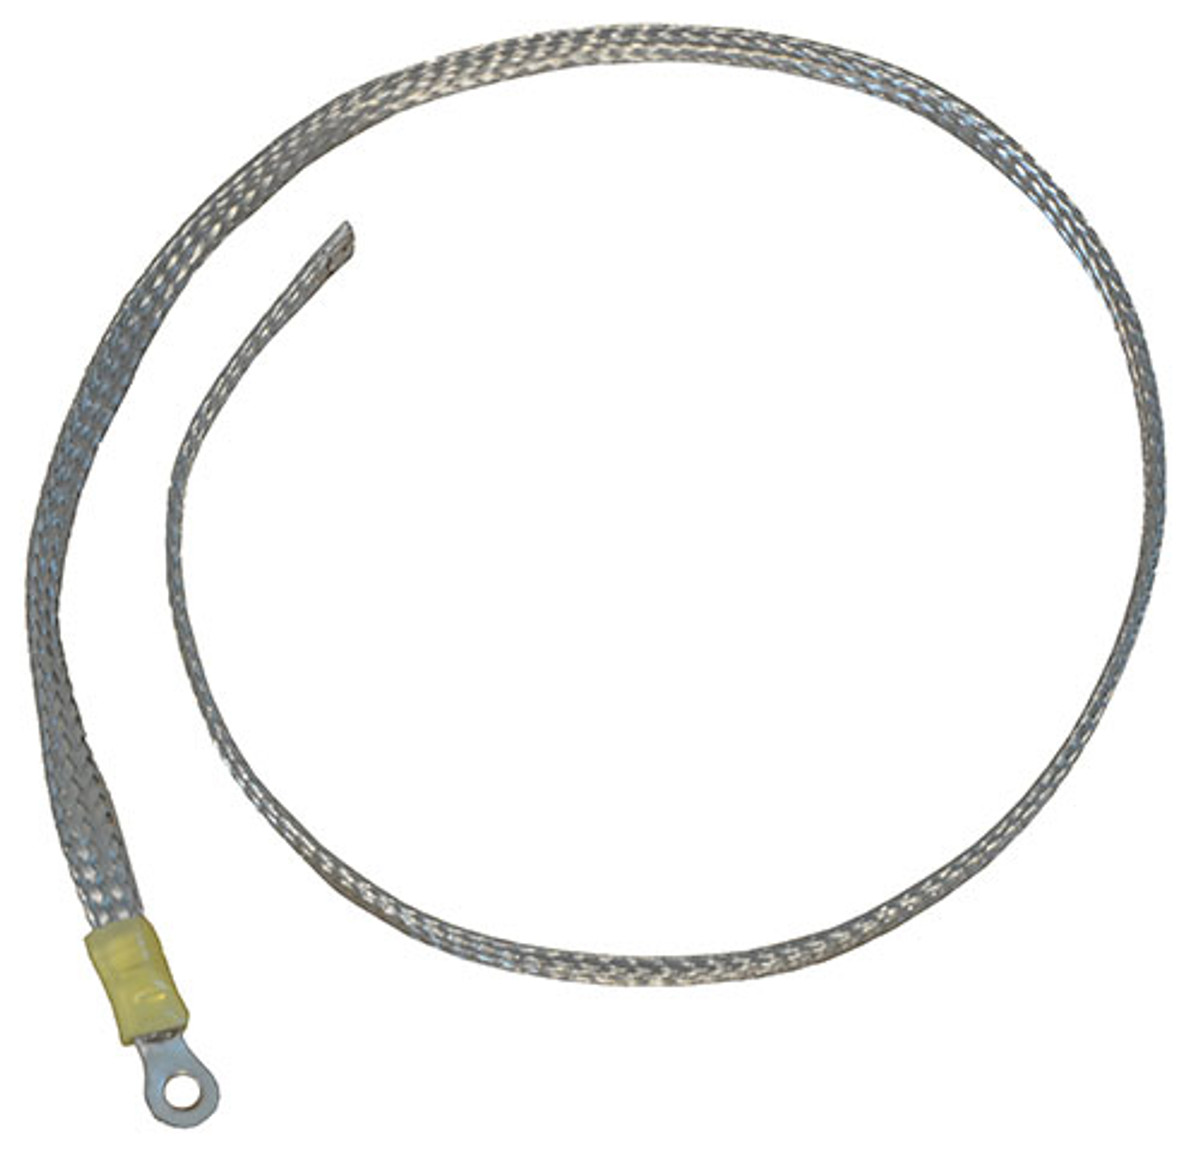 Bonding Straps for Cessna Aircraft
Direct replacements for Cessna 1517102-8 series bonding straps
For Elevator, Rudder, Aileron, and other applications.
Bonding straps are used to ground aircraft control surfaces. They have a short life due to work hardening and related metal fatigue failure from the moving controls.